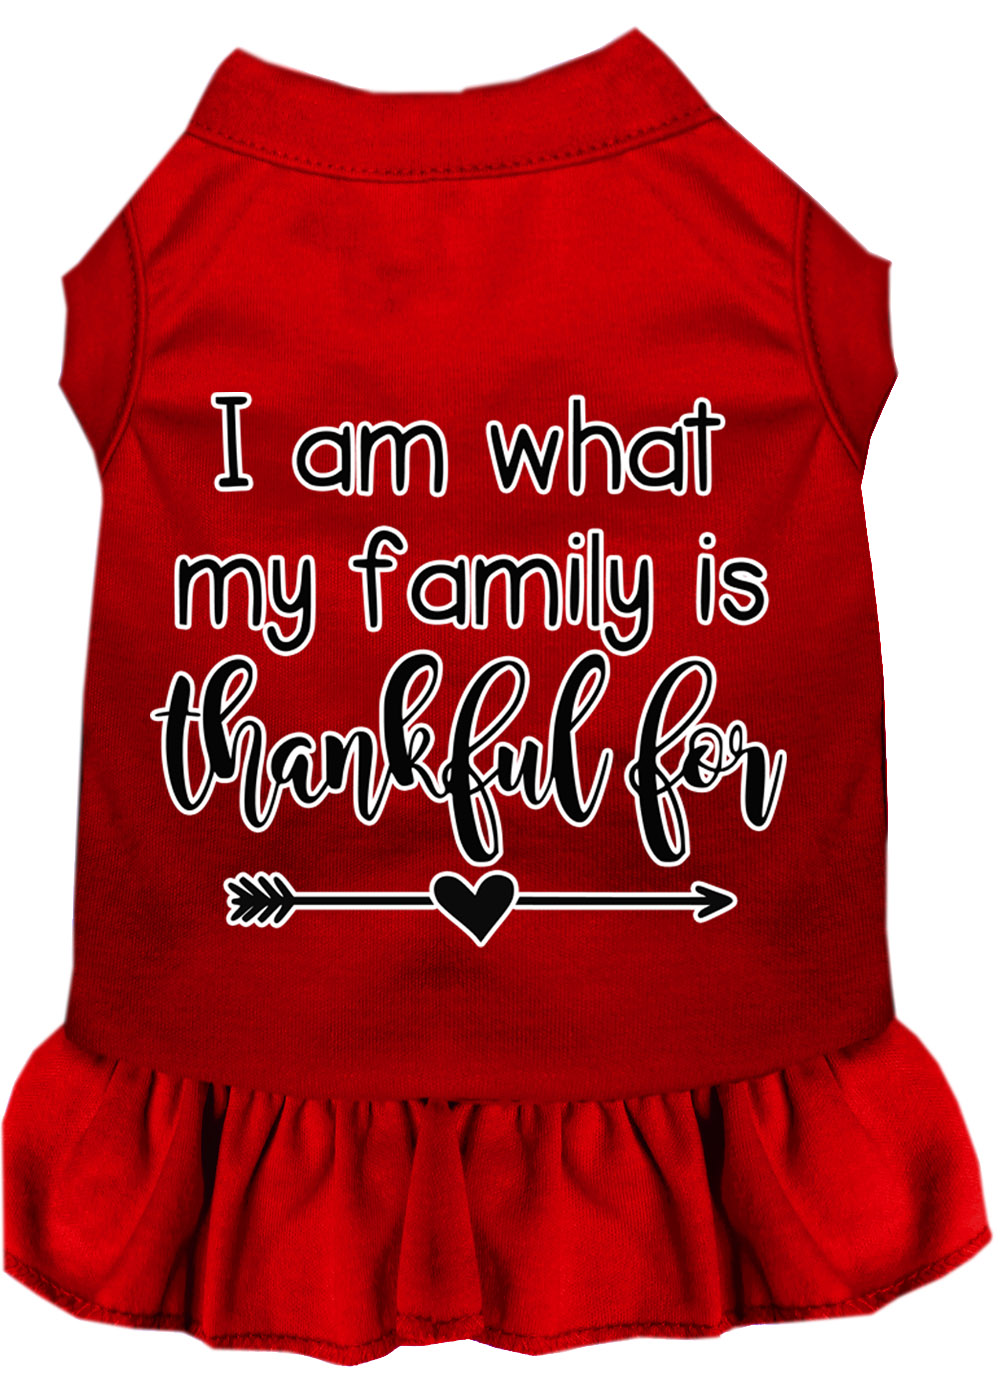 I Am What My Family is Thankful For Screen Print Dog Dress Red XL